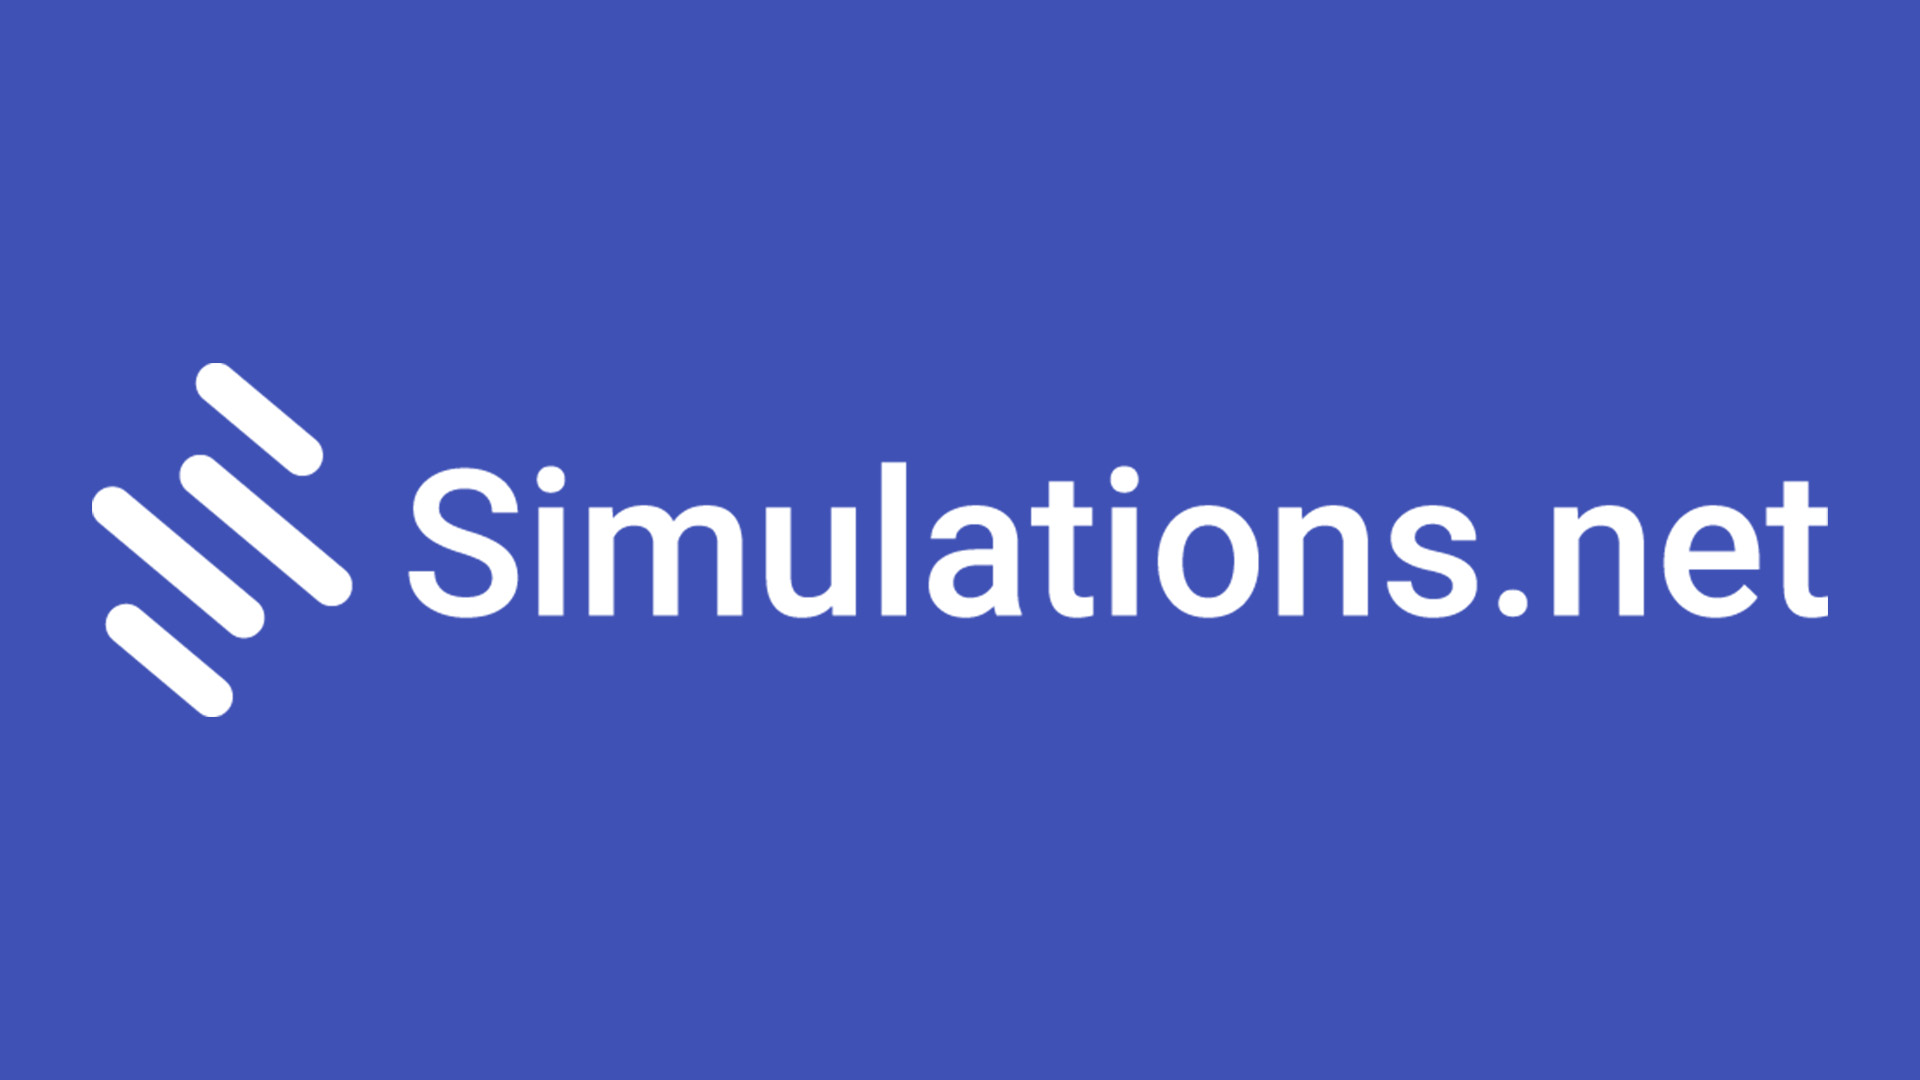 About Simulations.net